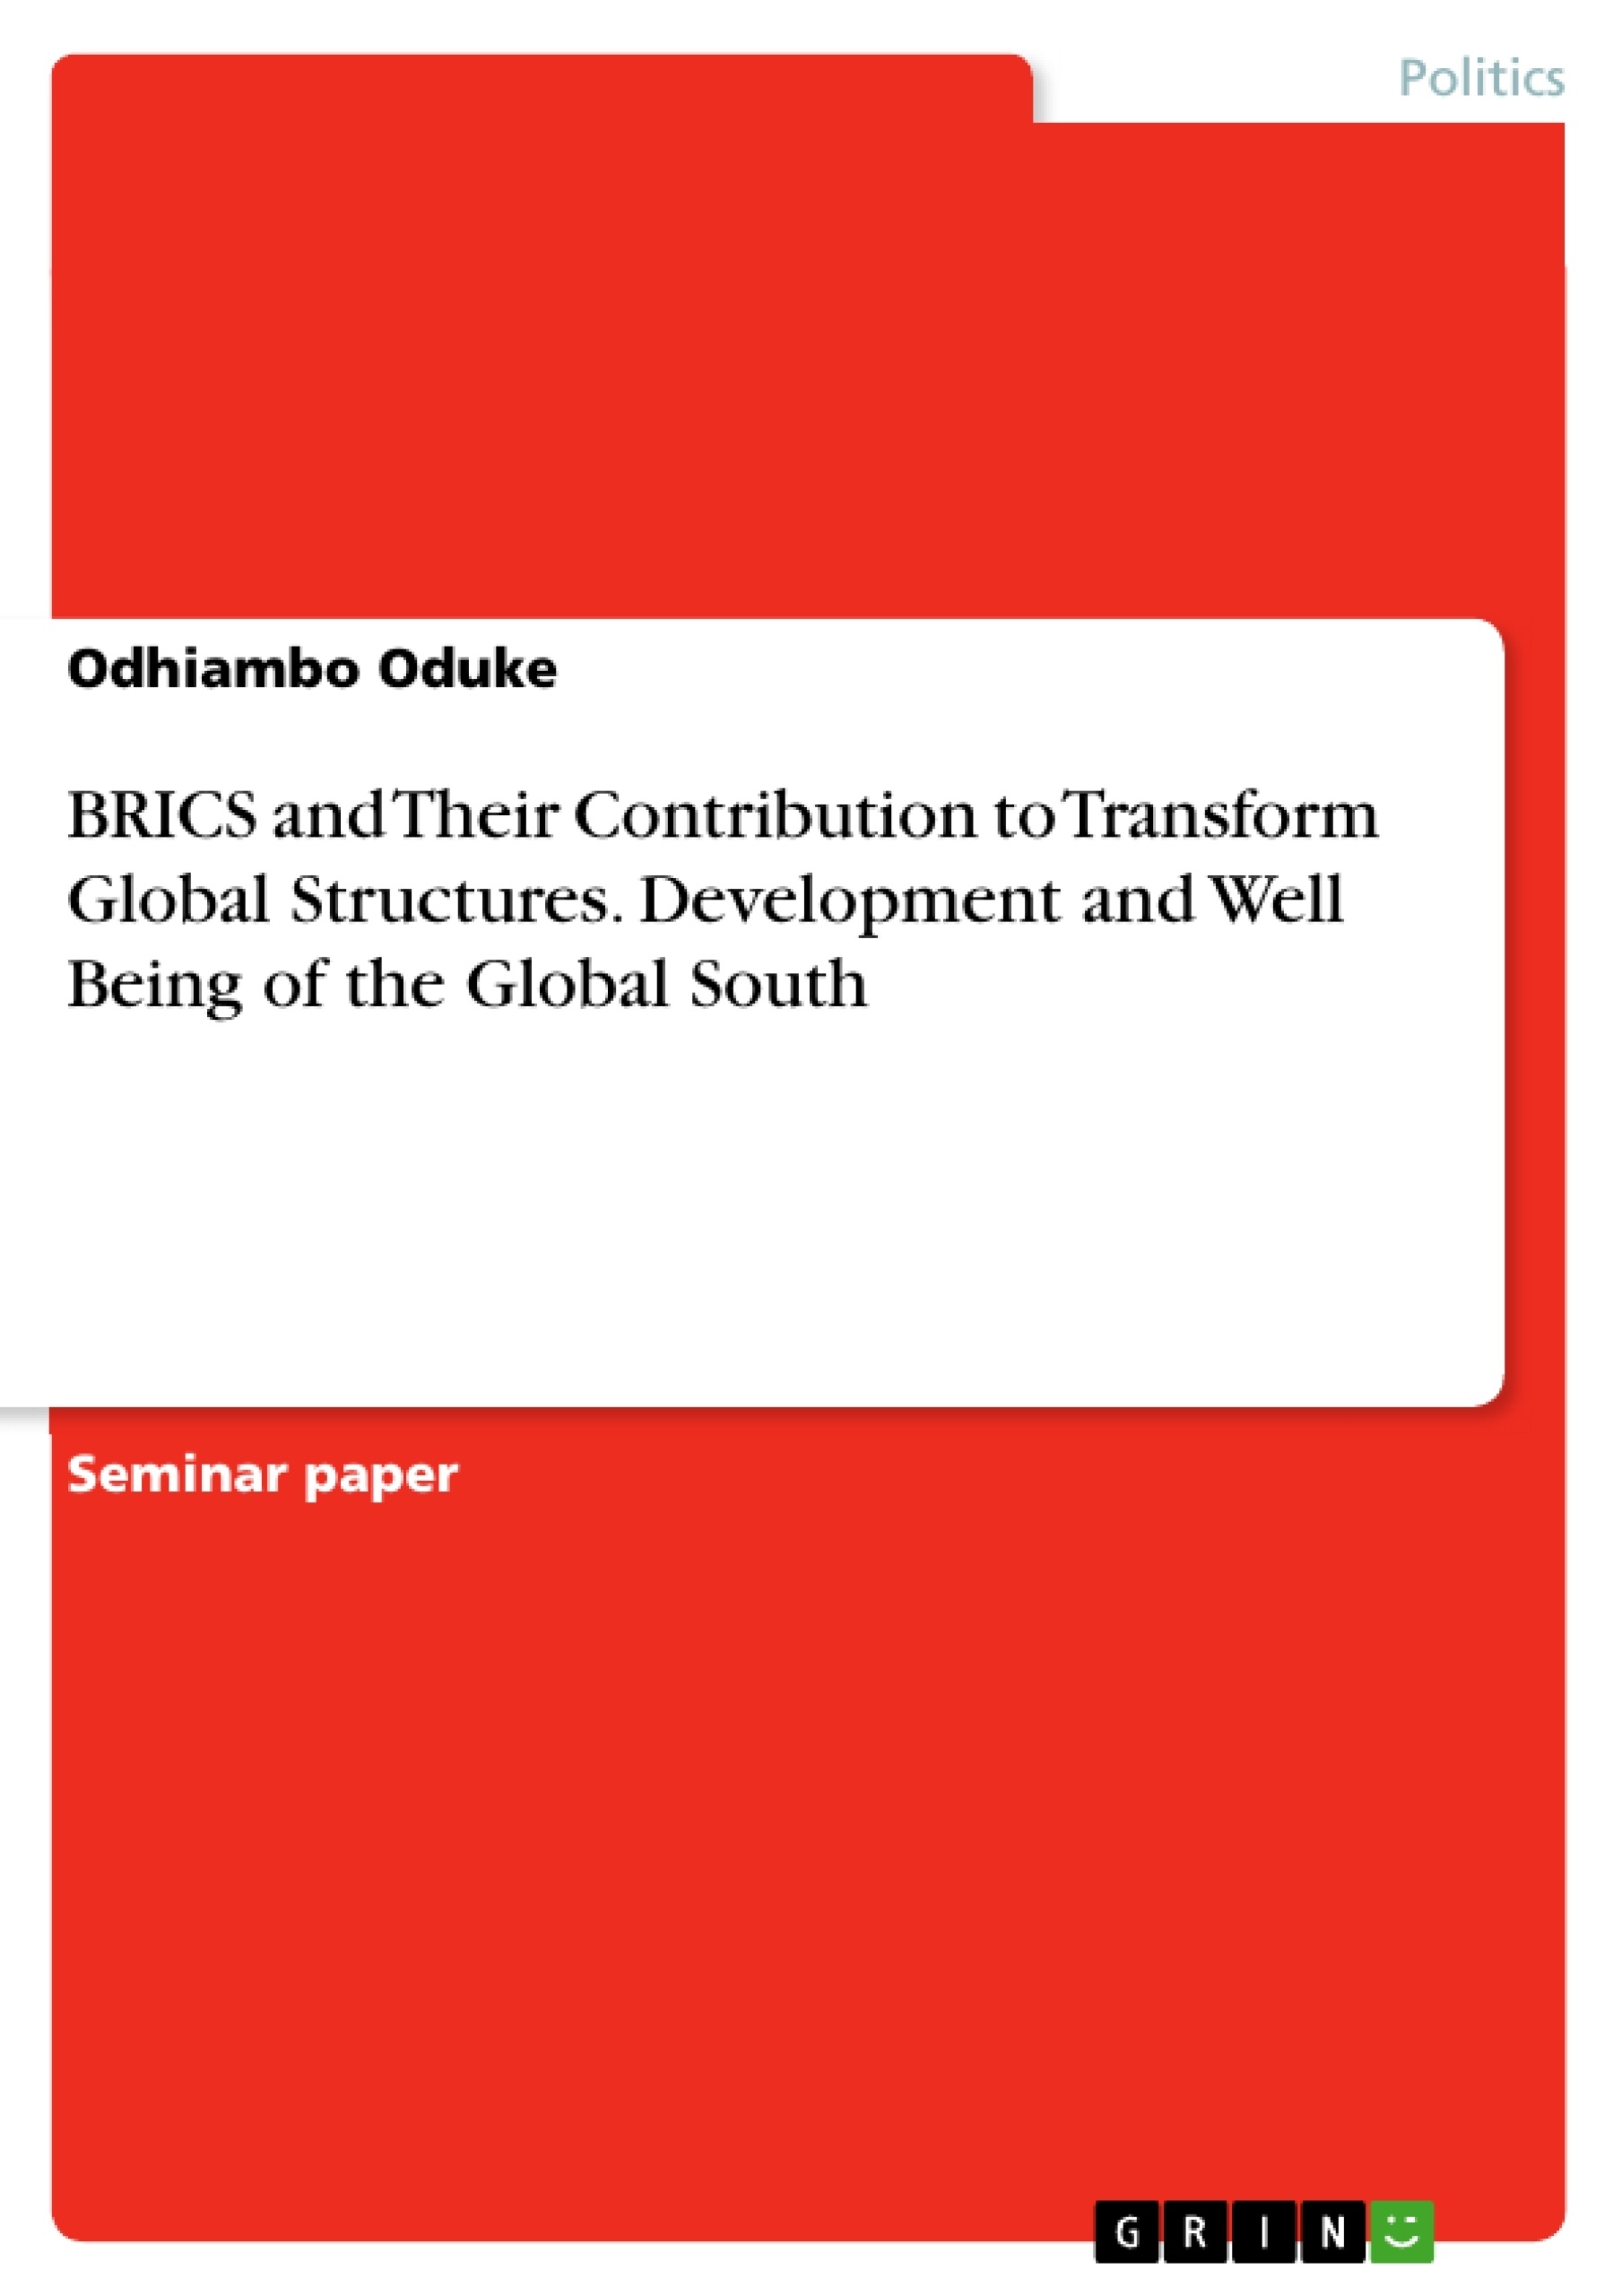 Title: BRICS and Their Contribution to Transform Global Structures. Development and Well Being of the Global South